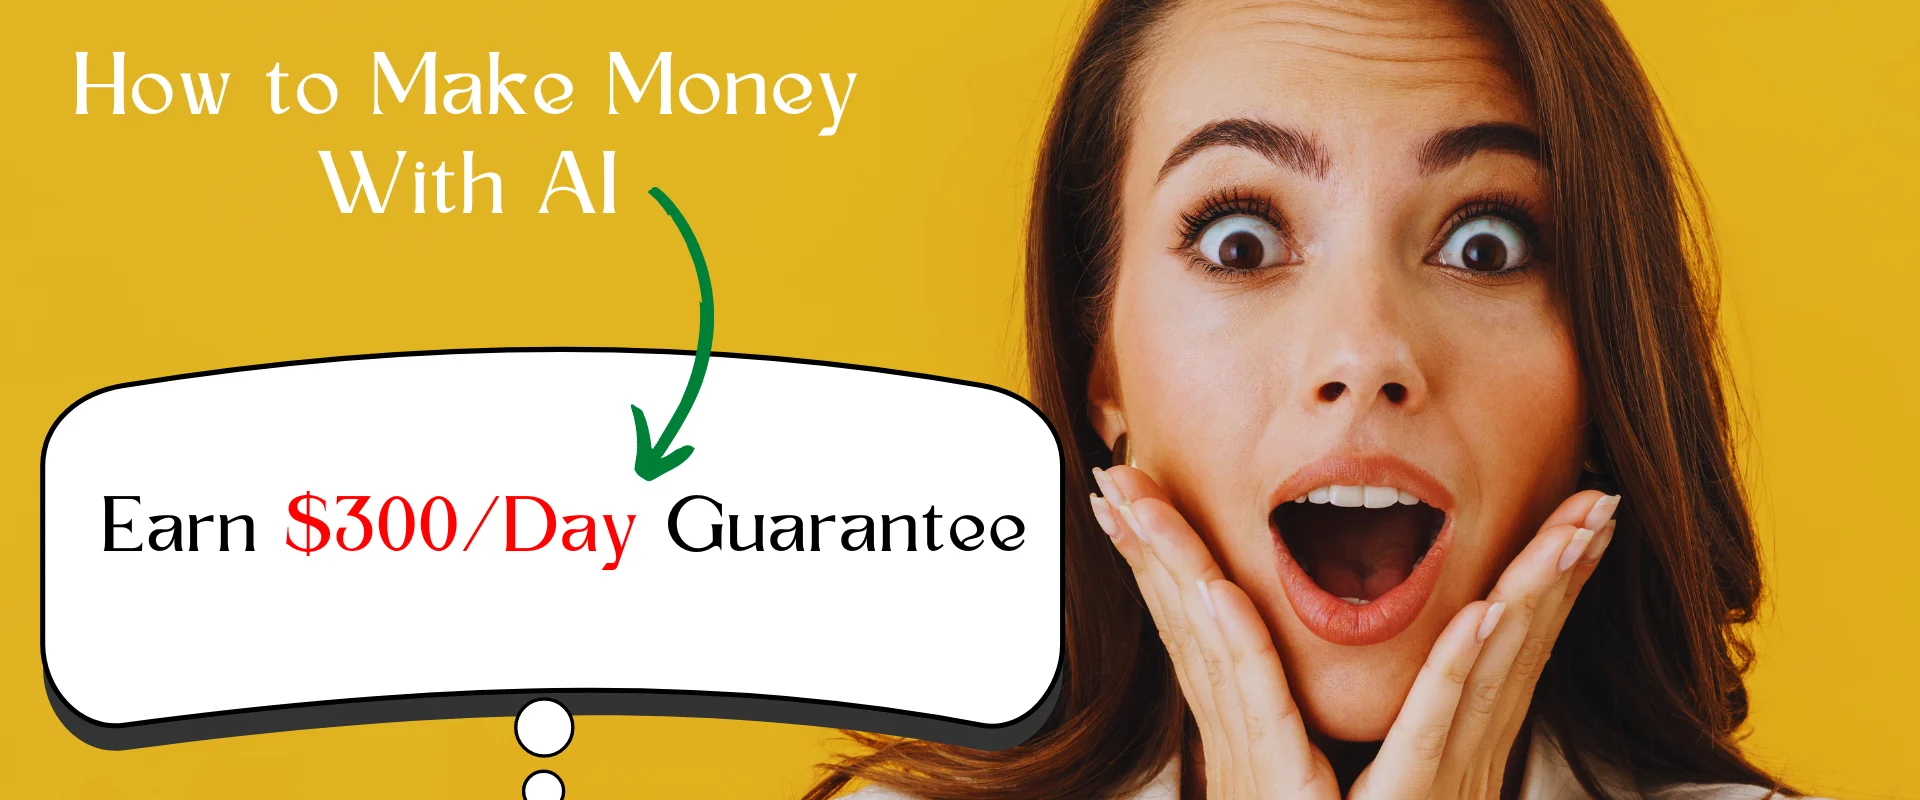 How to Make Money With AI: Earn $200 – $300/Day Guaranteed